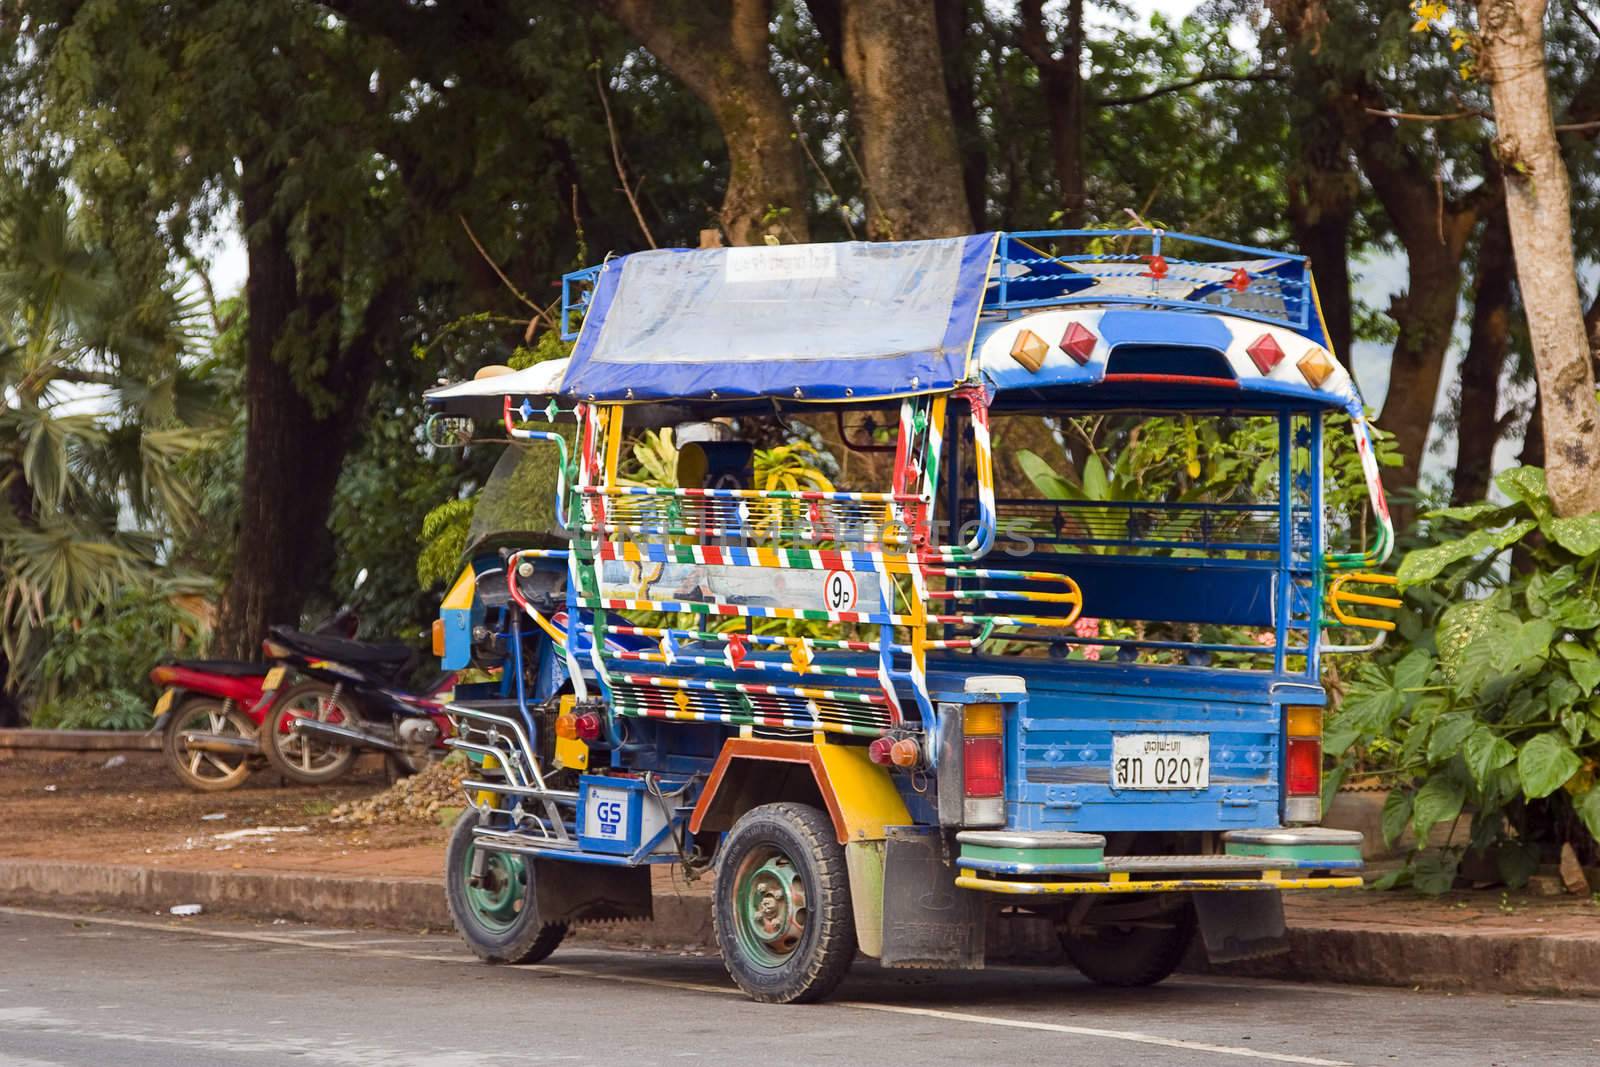 A Laotian tuk-tuk. Colorful and attractive, the owner has to do what he can to attract customers. These tuk-tuks are allowed to seat 9 people. 